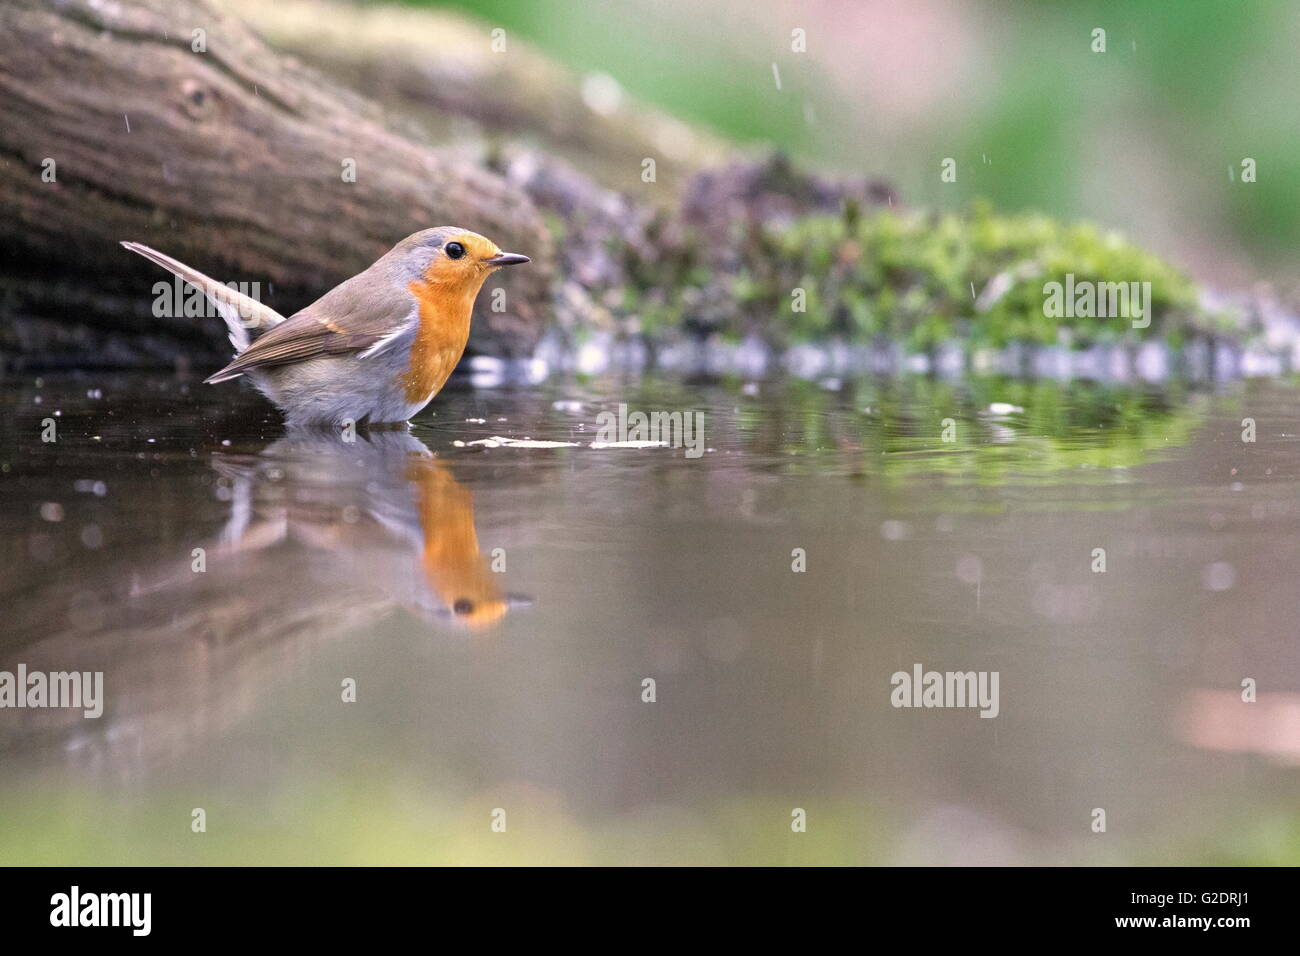 robin sitting in forest puddle in the rain, Netherlands Stock Photo